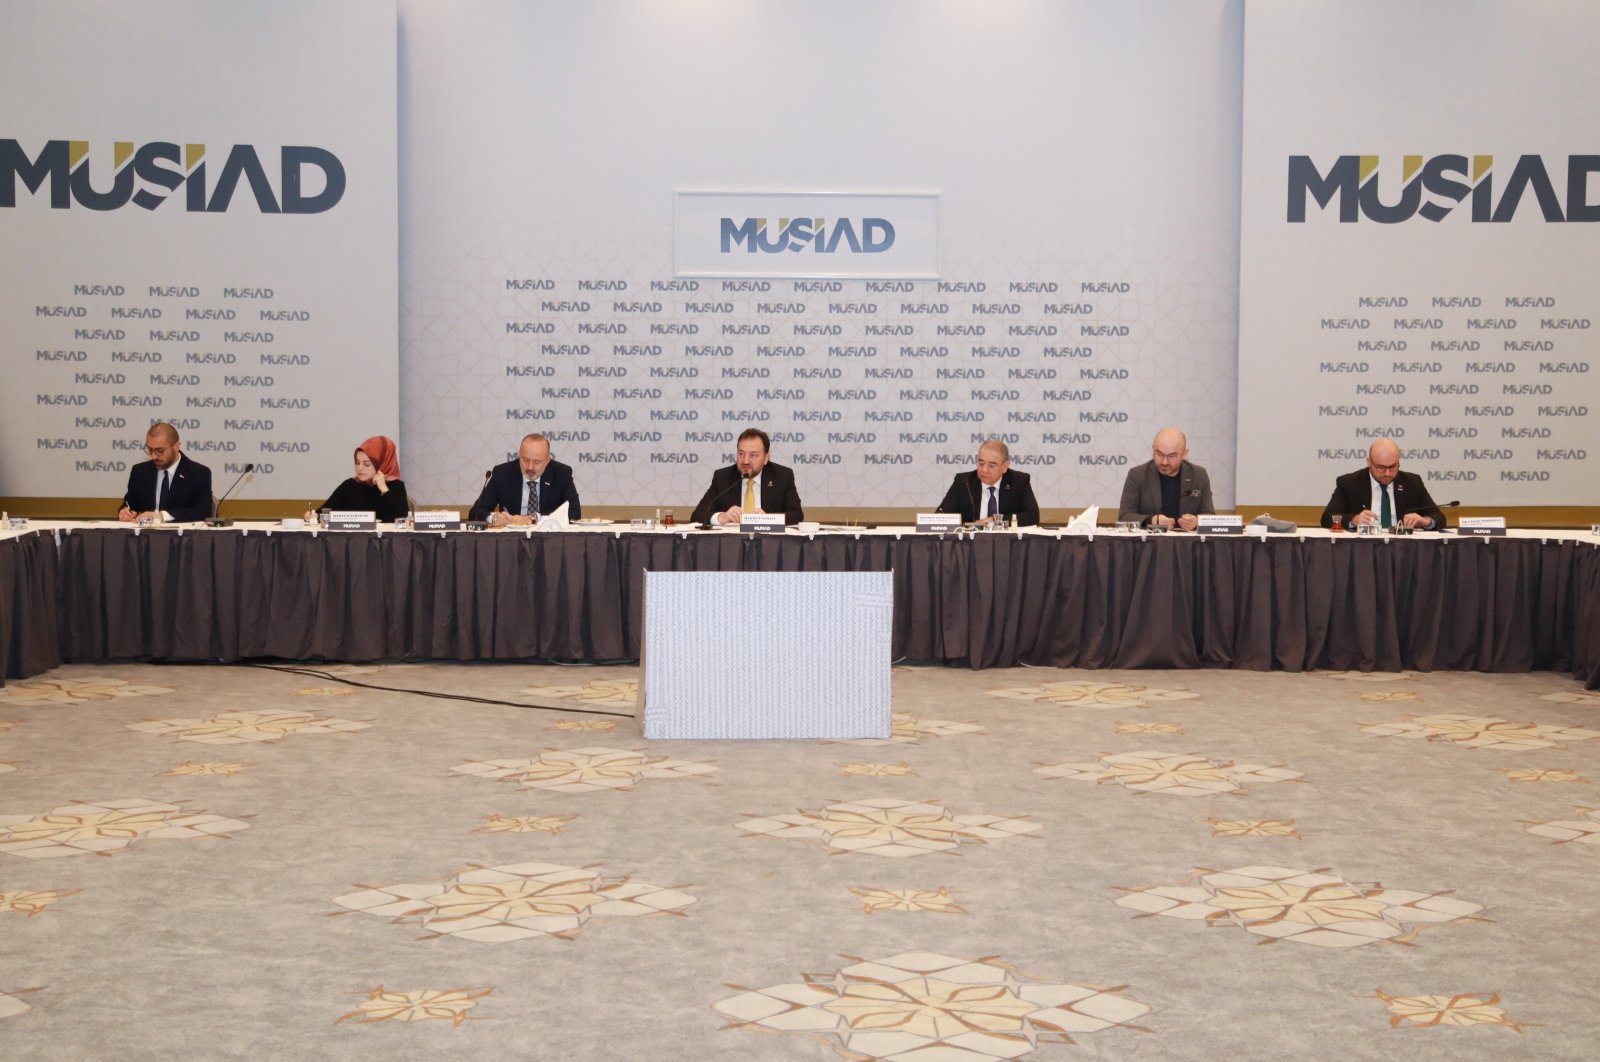 Mahmut Asmalı (C), the chairperson of Independent Industrialists and Businesspersons Association (MÜSIAD) and other executives during a meeting with press members in Istanbul, Turkey, Feb. 9, 2022. (Courtesy of MÜSIAD)